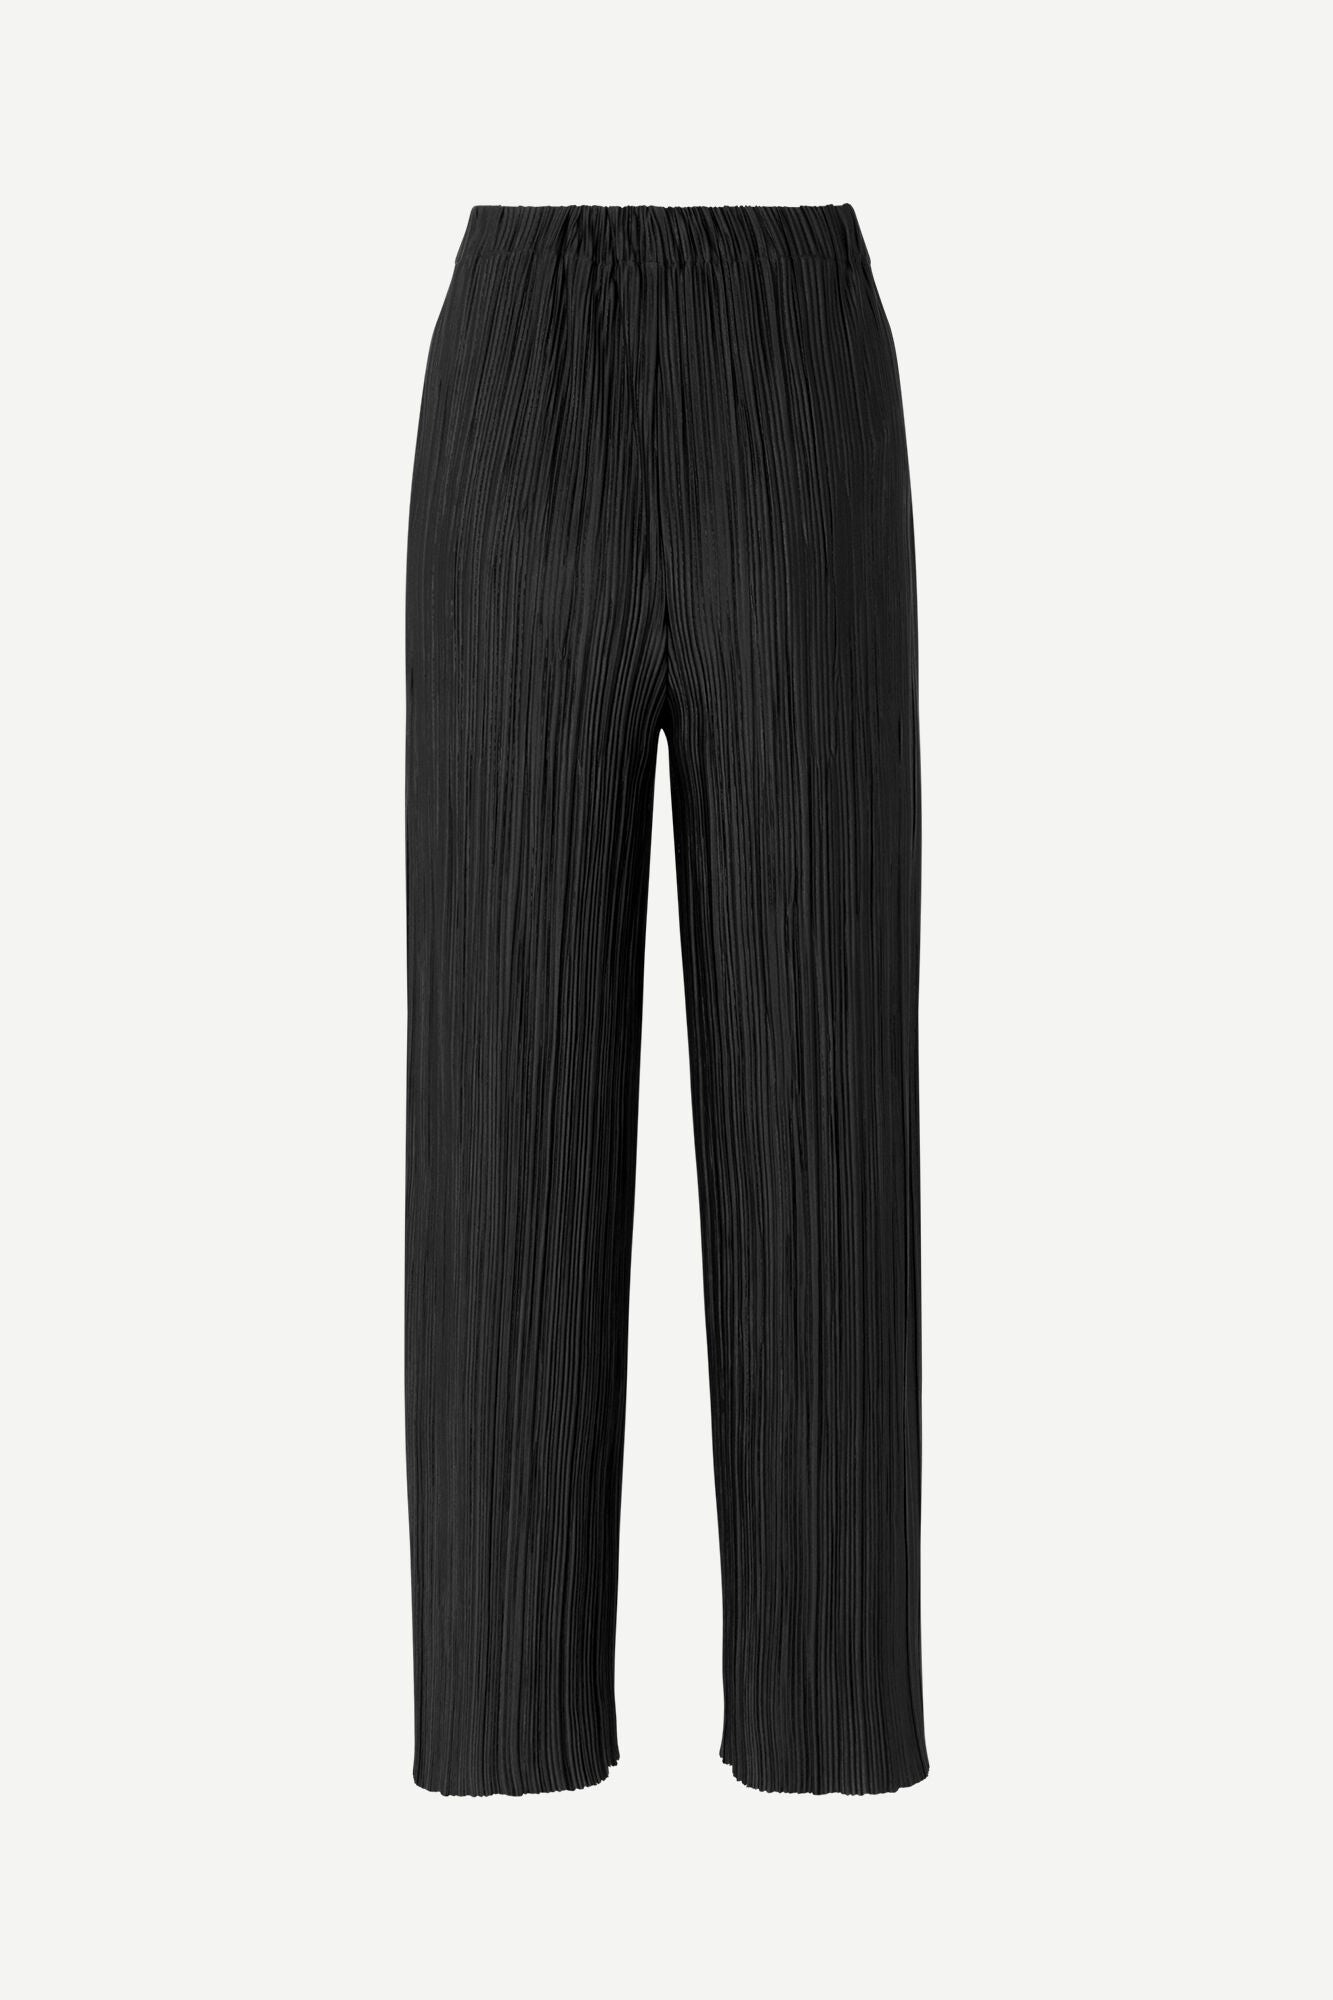 Pleated trousers in black